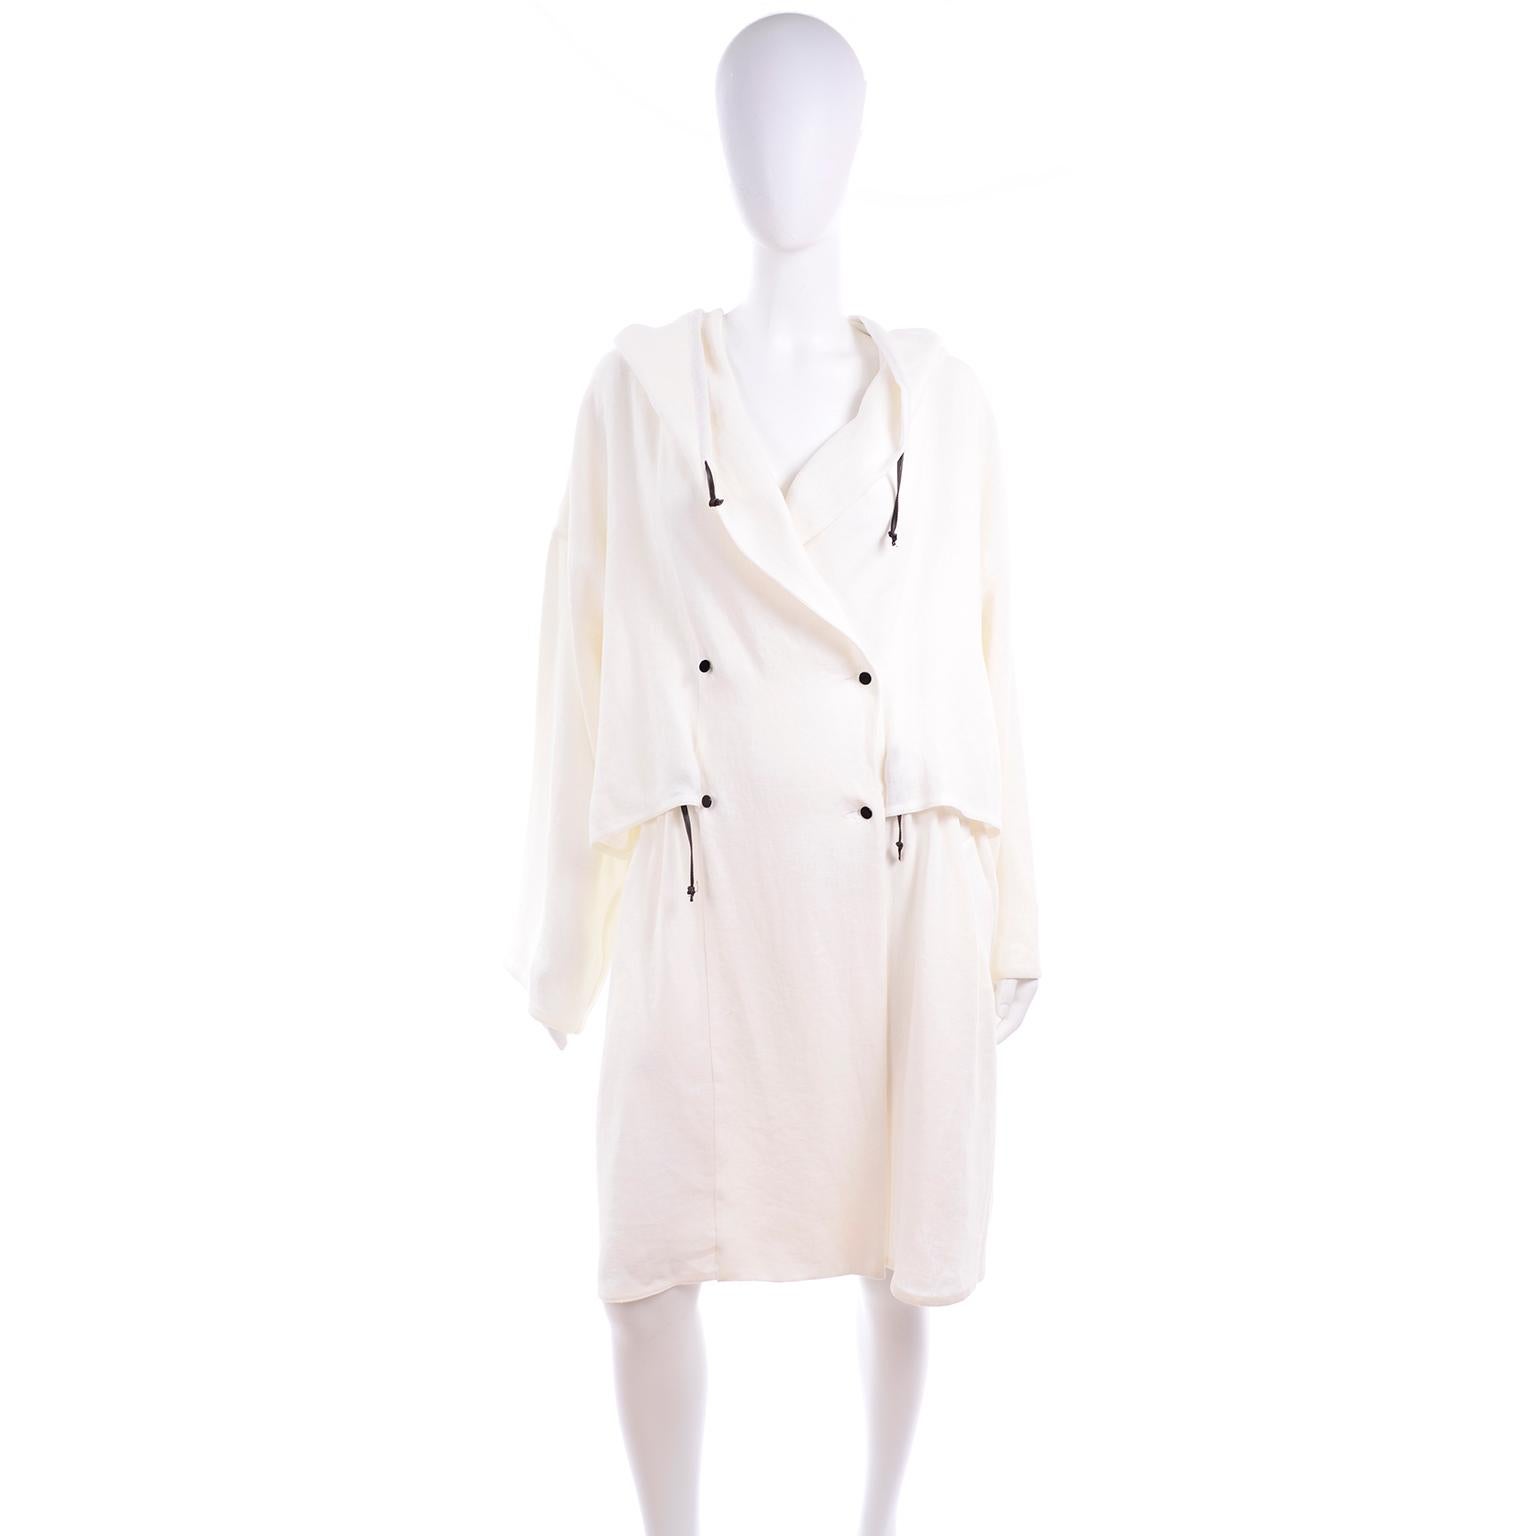 Deadstock New White Linen Dusan Coat Drawstring Jacket with Hood New With Tags 3